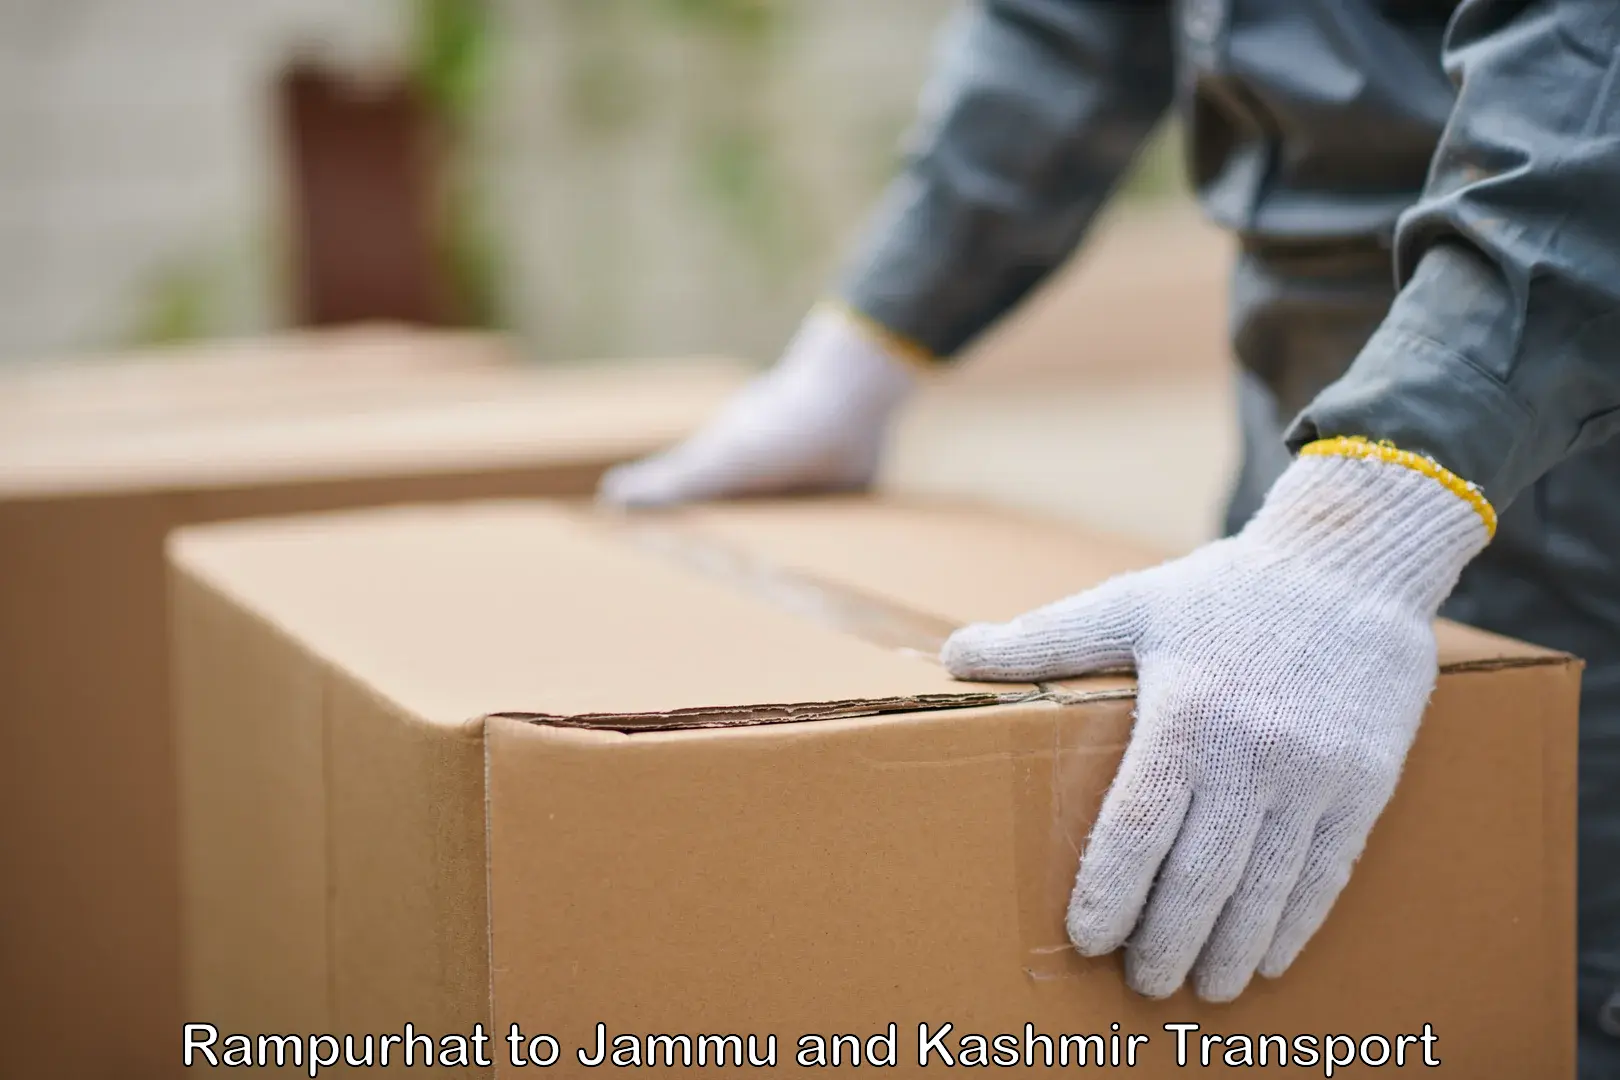 Truck transport companies in India Rampurhat to Pulwama